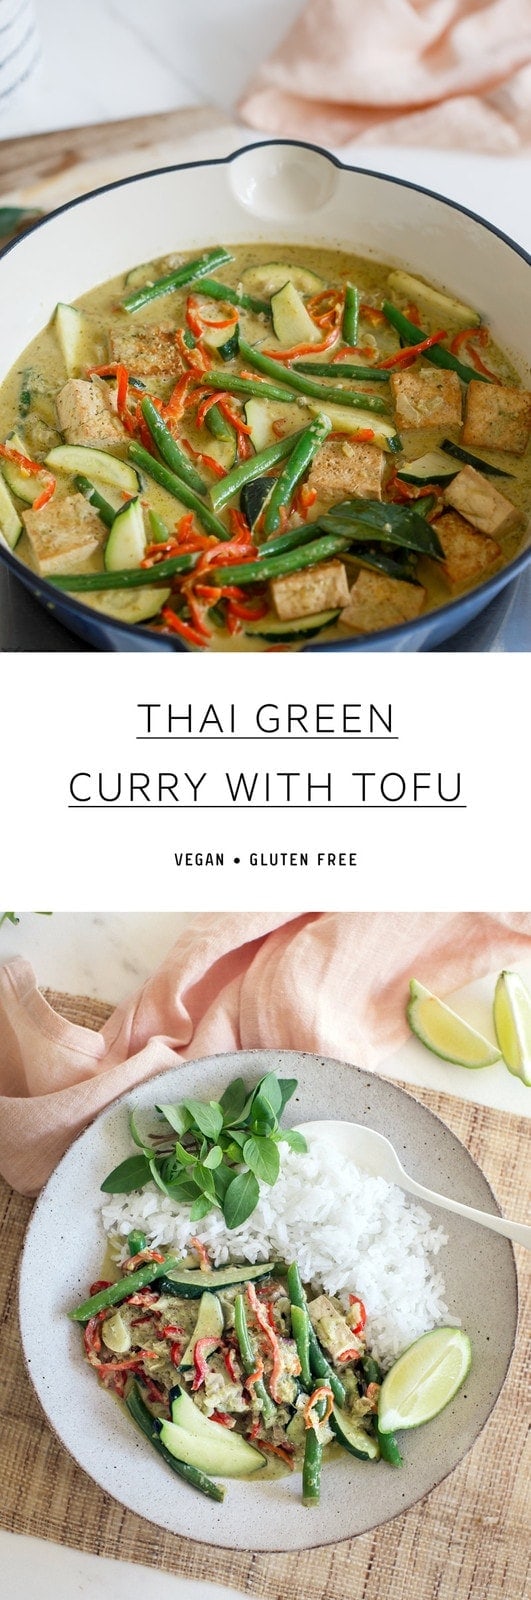 A fragrant vegan Thai Green Curry with tofu, made with homemade curry paste. Finish with some Thai basil and you’re onto a winner! A great healthy dinner. #healthydinnerideas #healthythai #plantbaseddinners #vegandinnerideas #vegancurry #veganthai #veganthaicurry #thaigreencurry #tofucurry #vegetariancurry #quickdinnerideas #thaidinner #AscensionKitchen // Pin to your own inspiration board! //